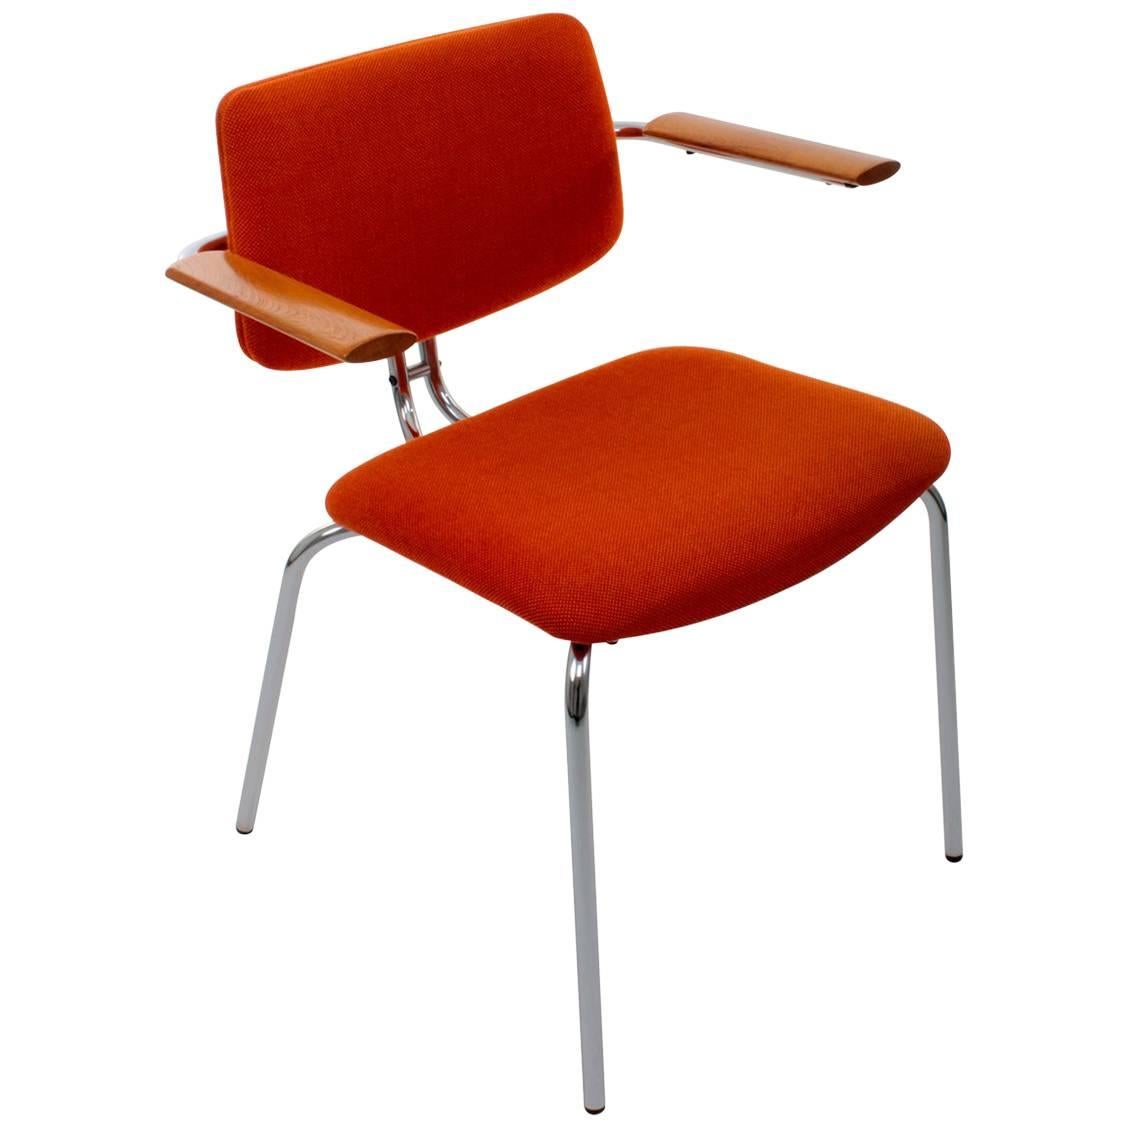 Chair by Duba, 1980s, Danish Modernist Dining Chair with Orange Upholstery For Sale